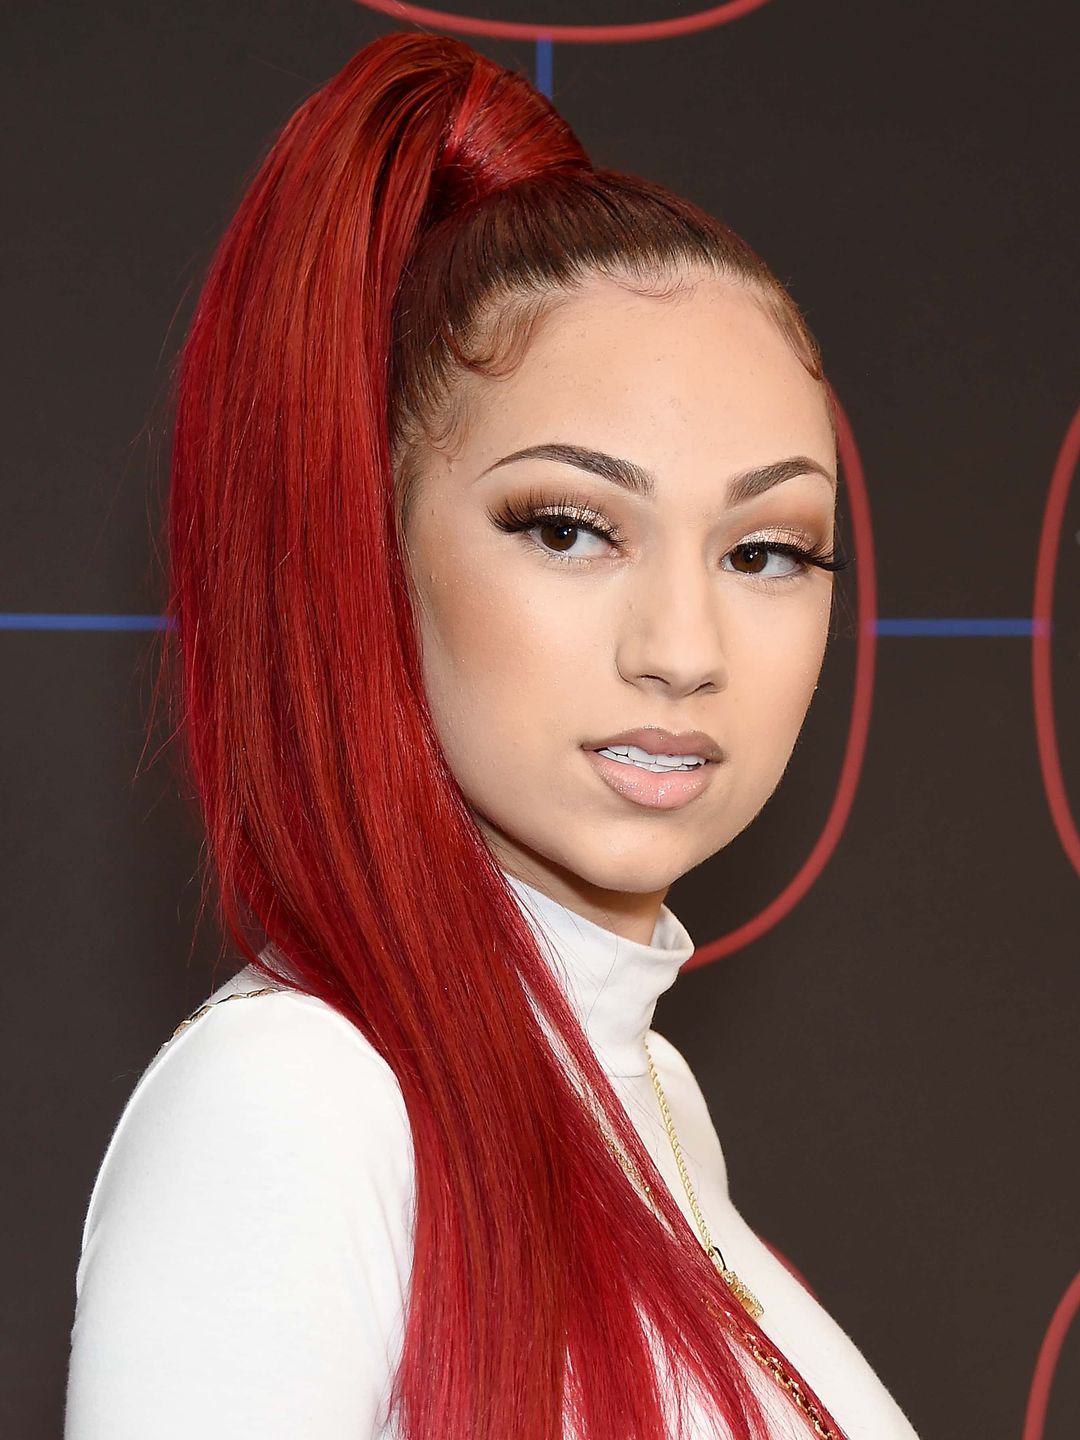 Danielle Bregoli who are her parents